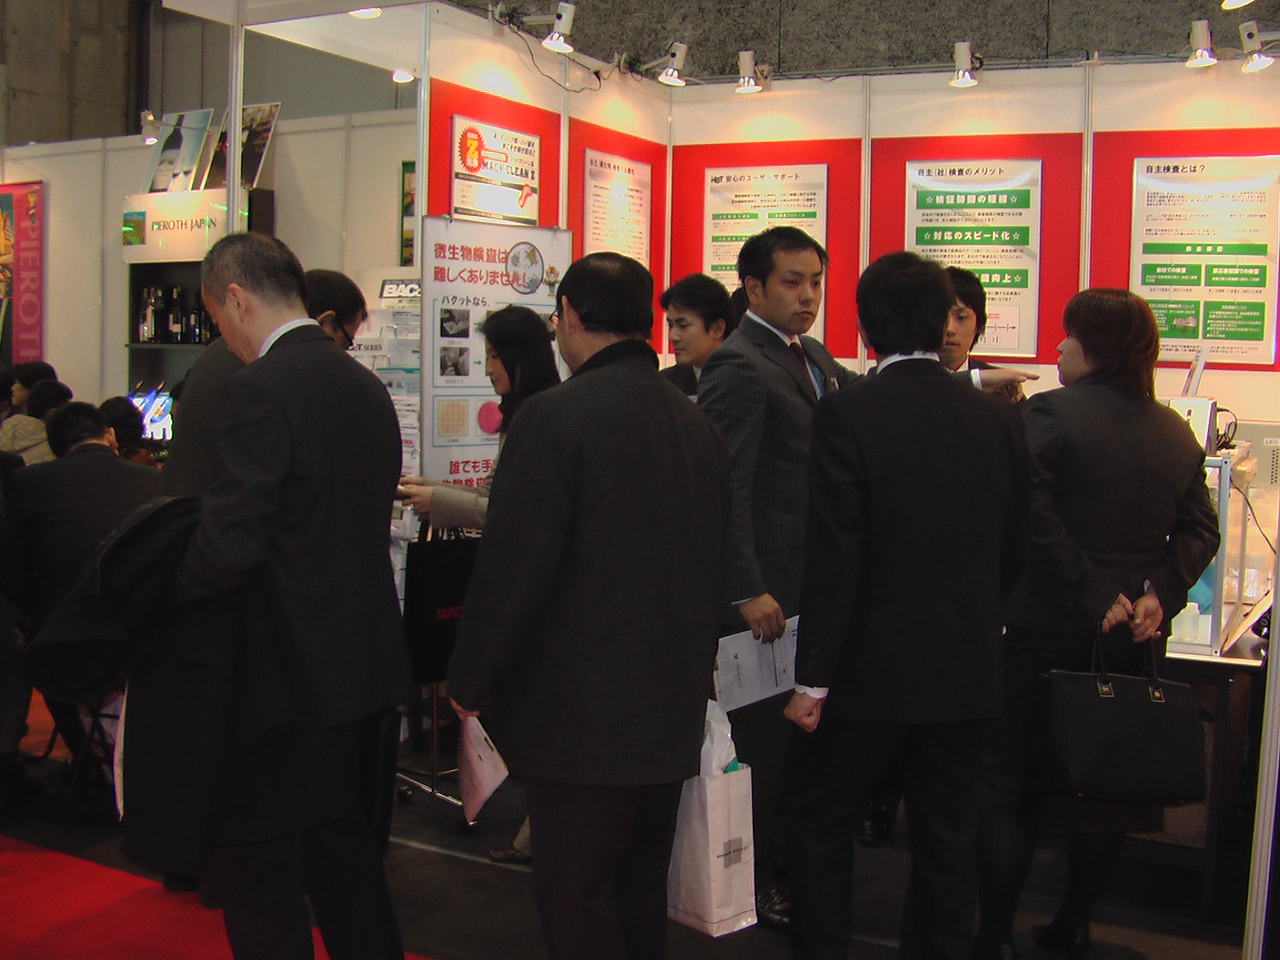 MOBAC SHOW (国際製パン製菓関連産業展)